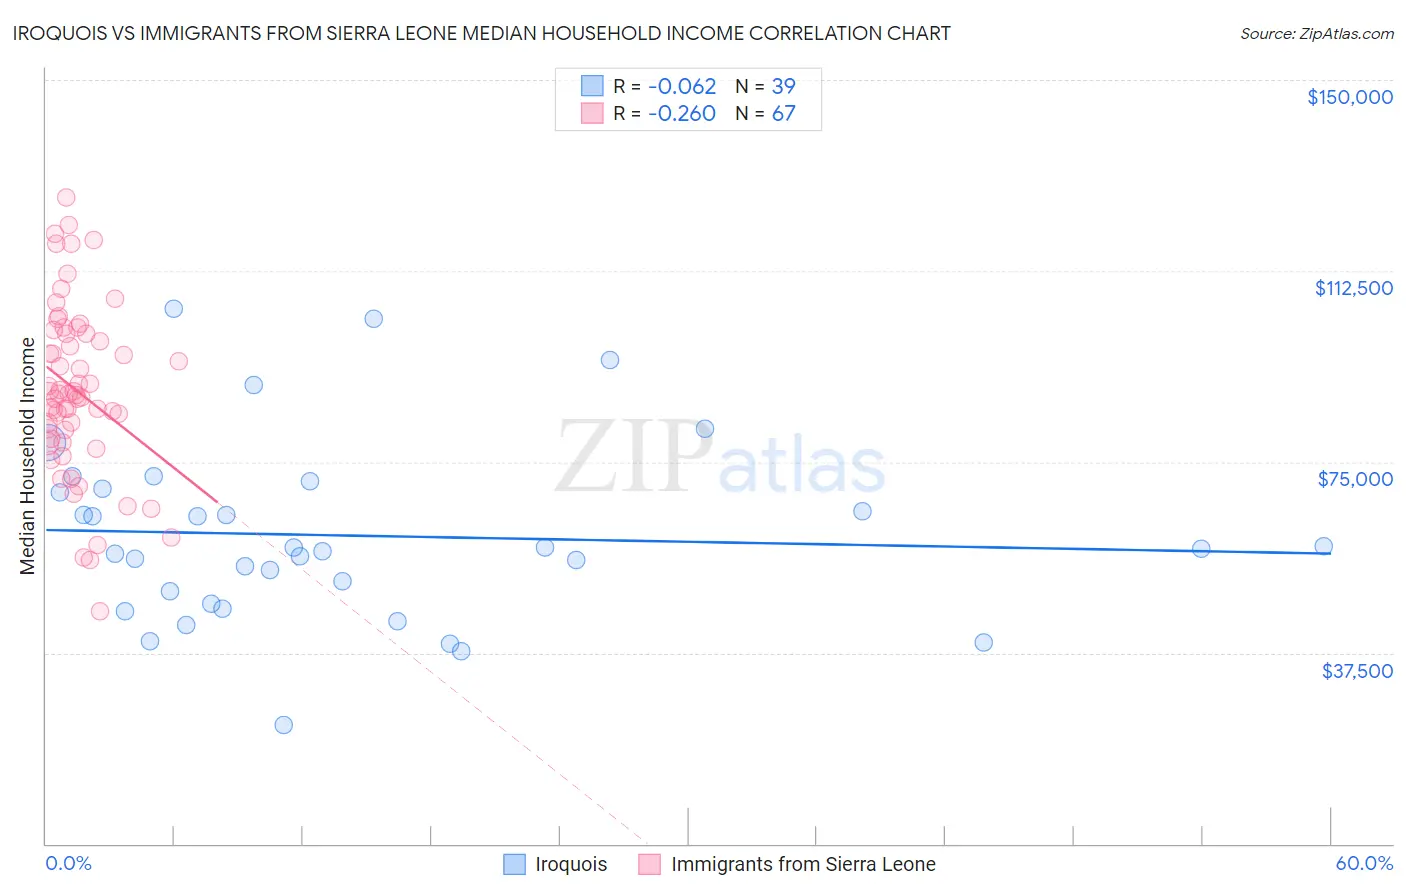 Iroquois vs Immigrants from Sierra Leone Median Household Income